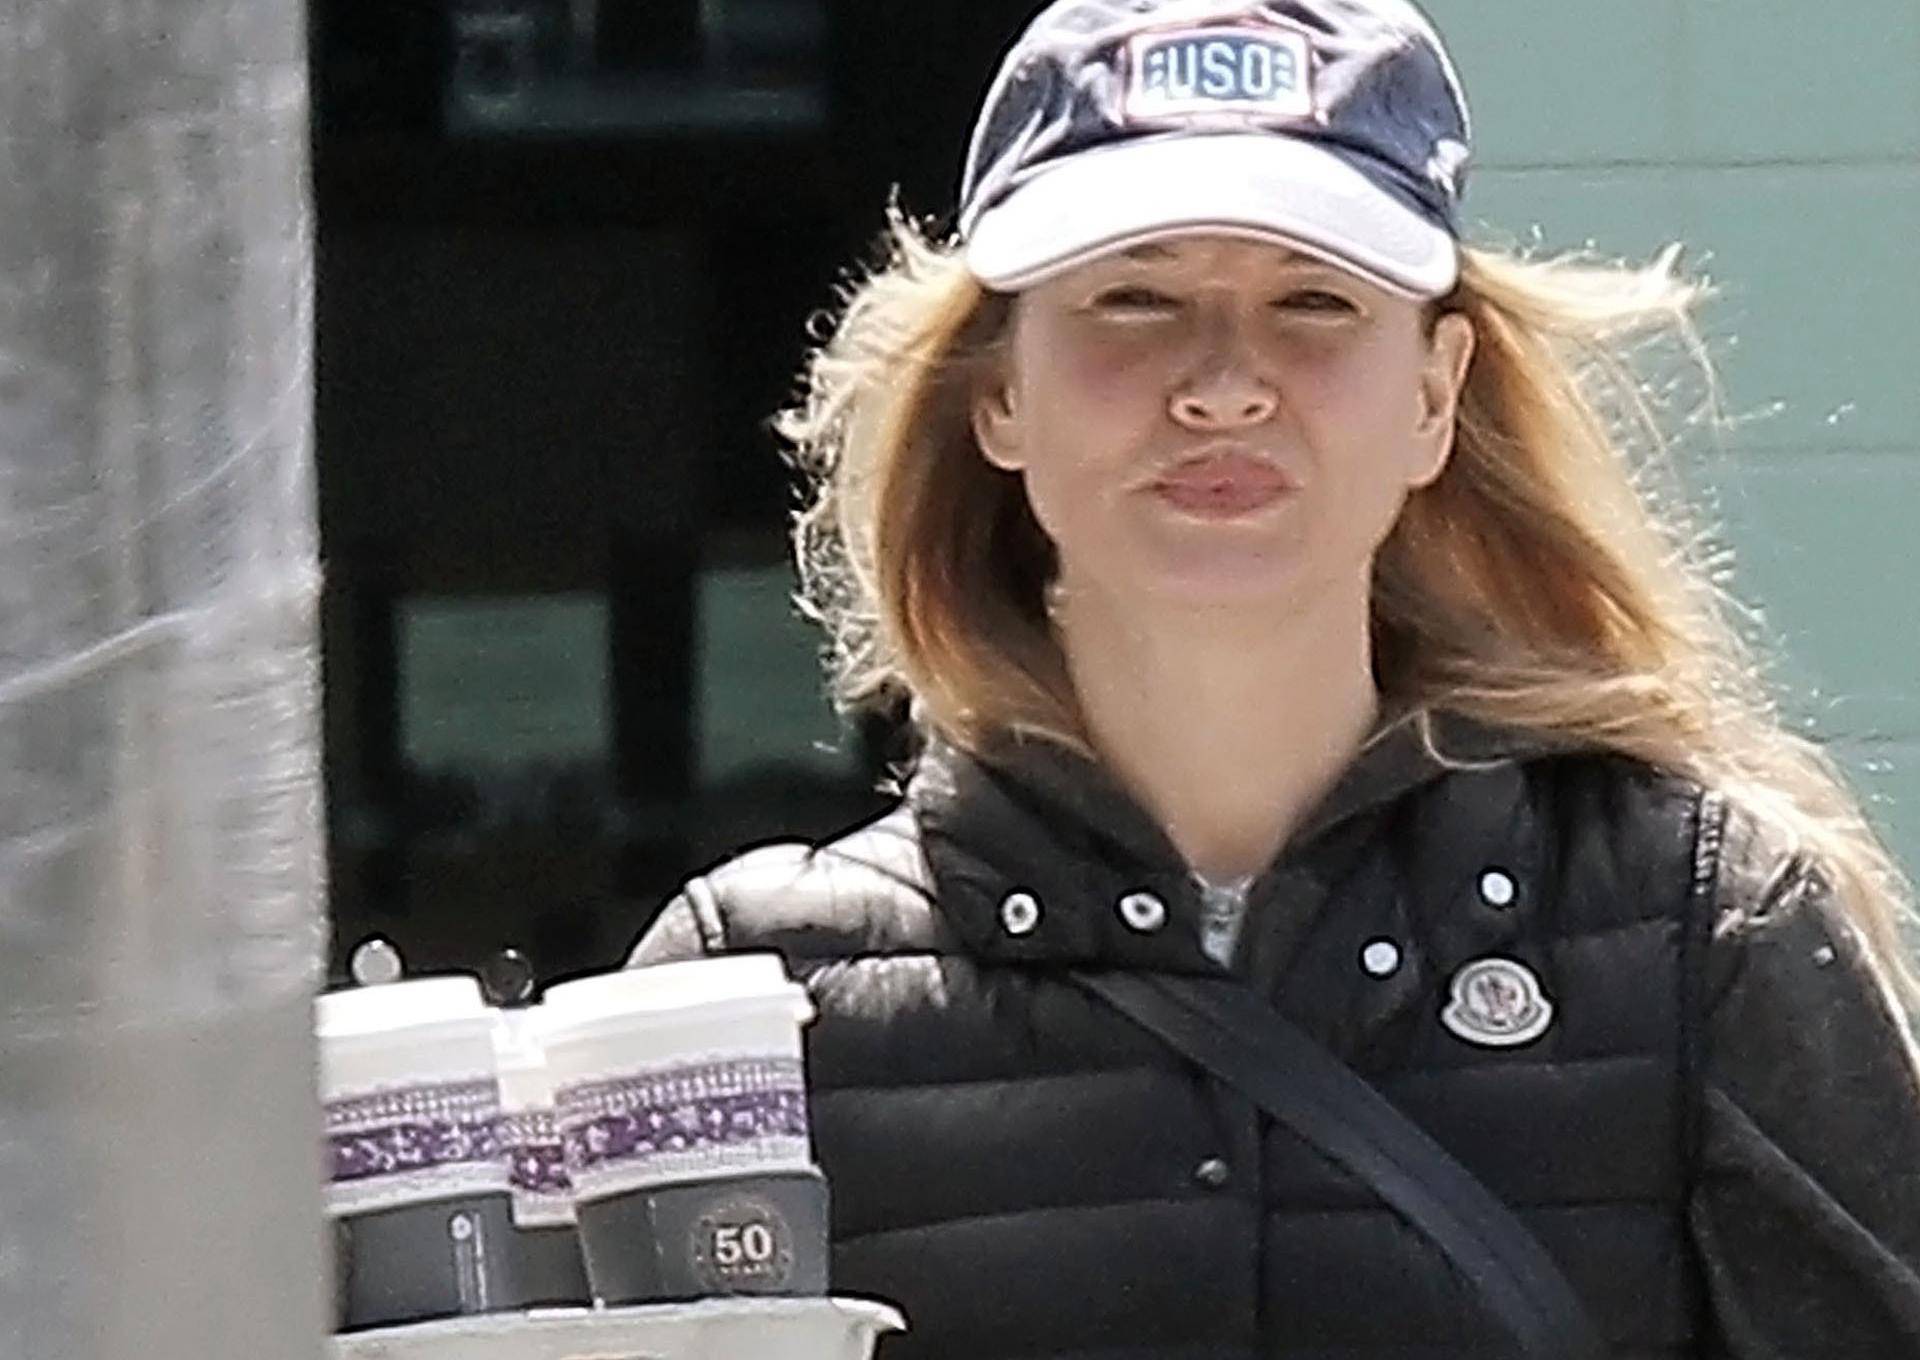 EXCLUSIVE: Renee Zellweger displays her significantly larger lips as she goes on a coffee run at Peet's Coffee & Tea